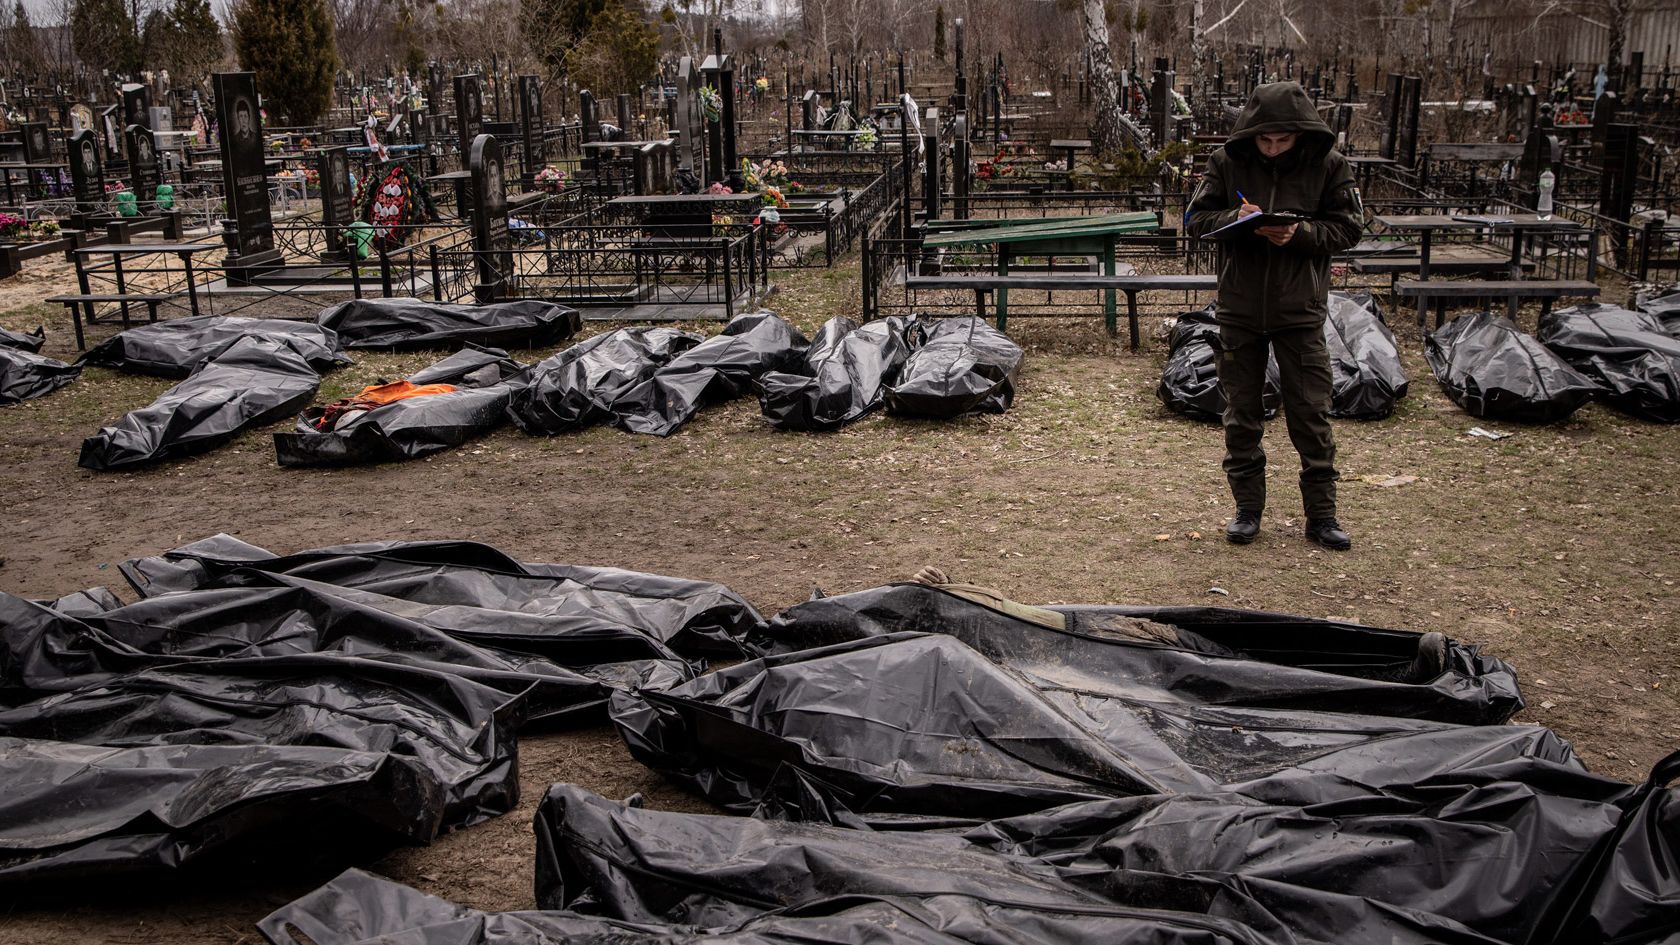 A man works to catalog some of the bodies discovered in Bucha, after Russian forces withdrew from the area.